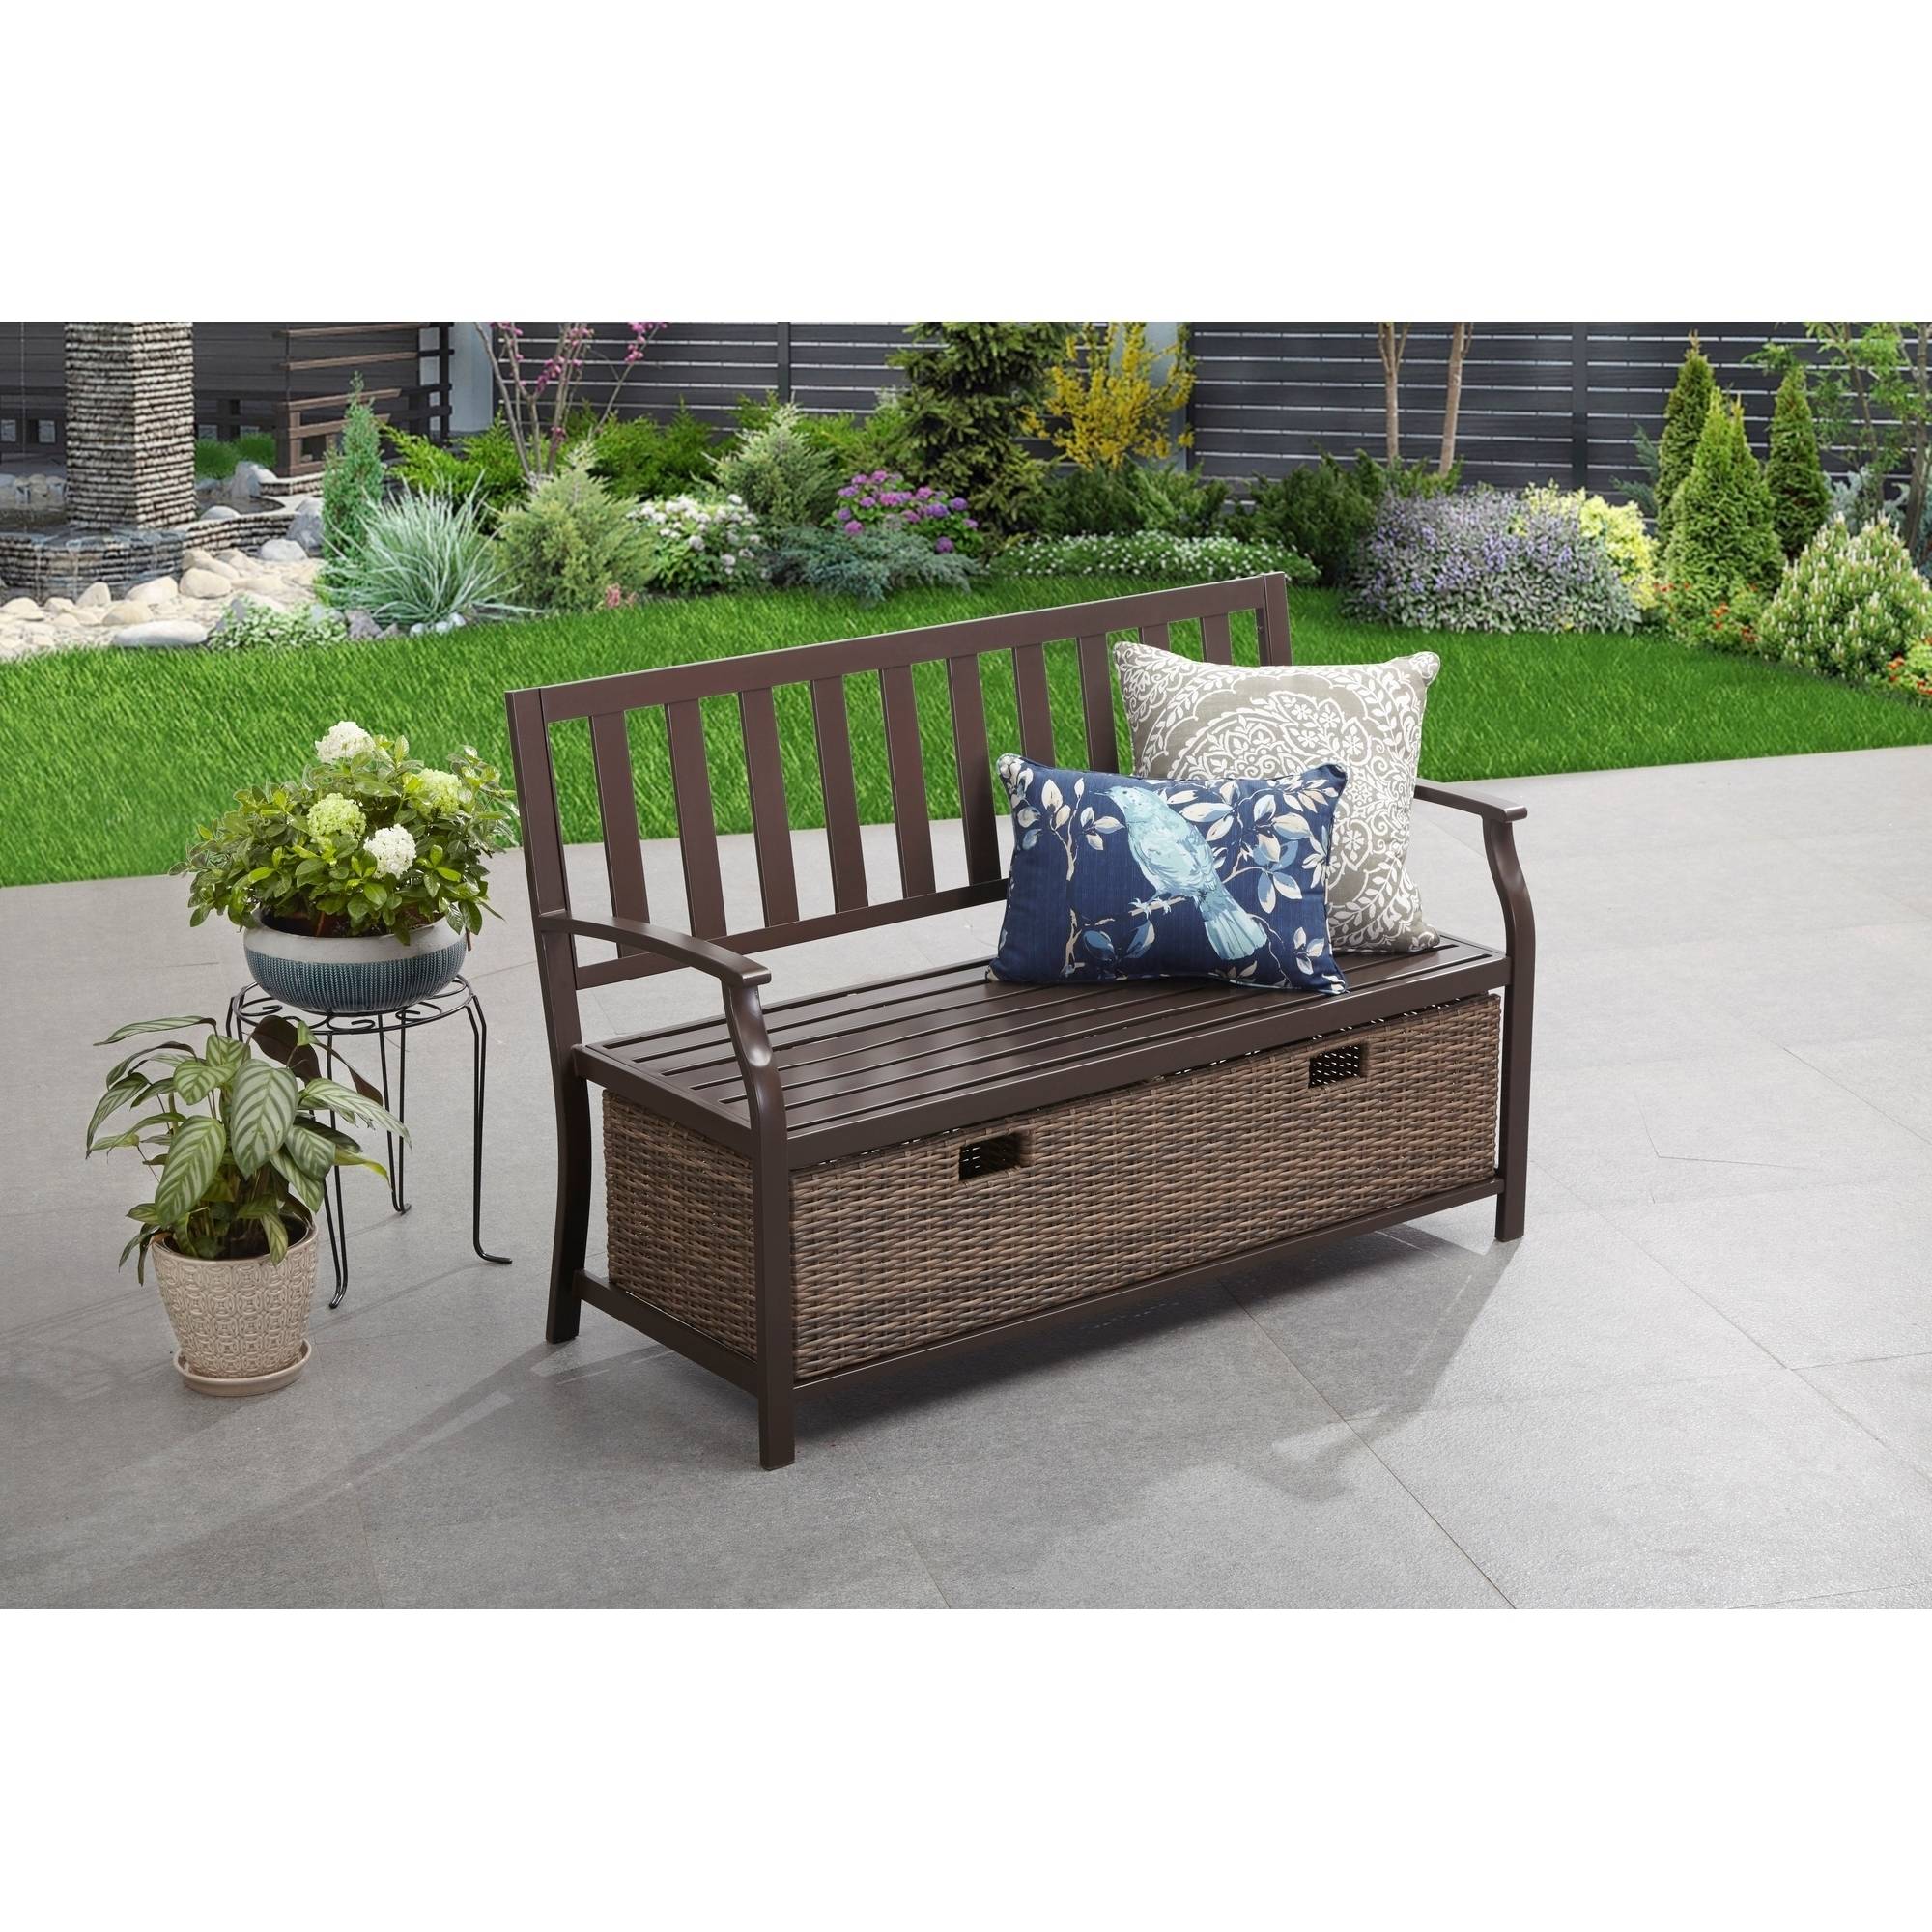 Better Homes & Gardens Camrose Farmhouse Steel Outdoor Bench with Wicker Storage Box, Bronze/Brown - image 1 of 11